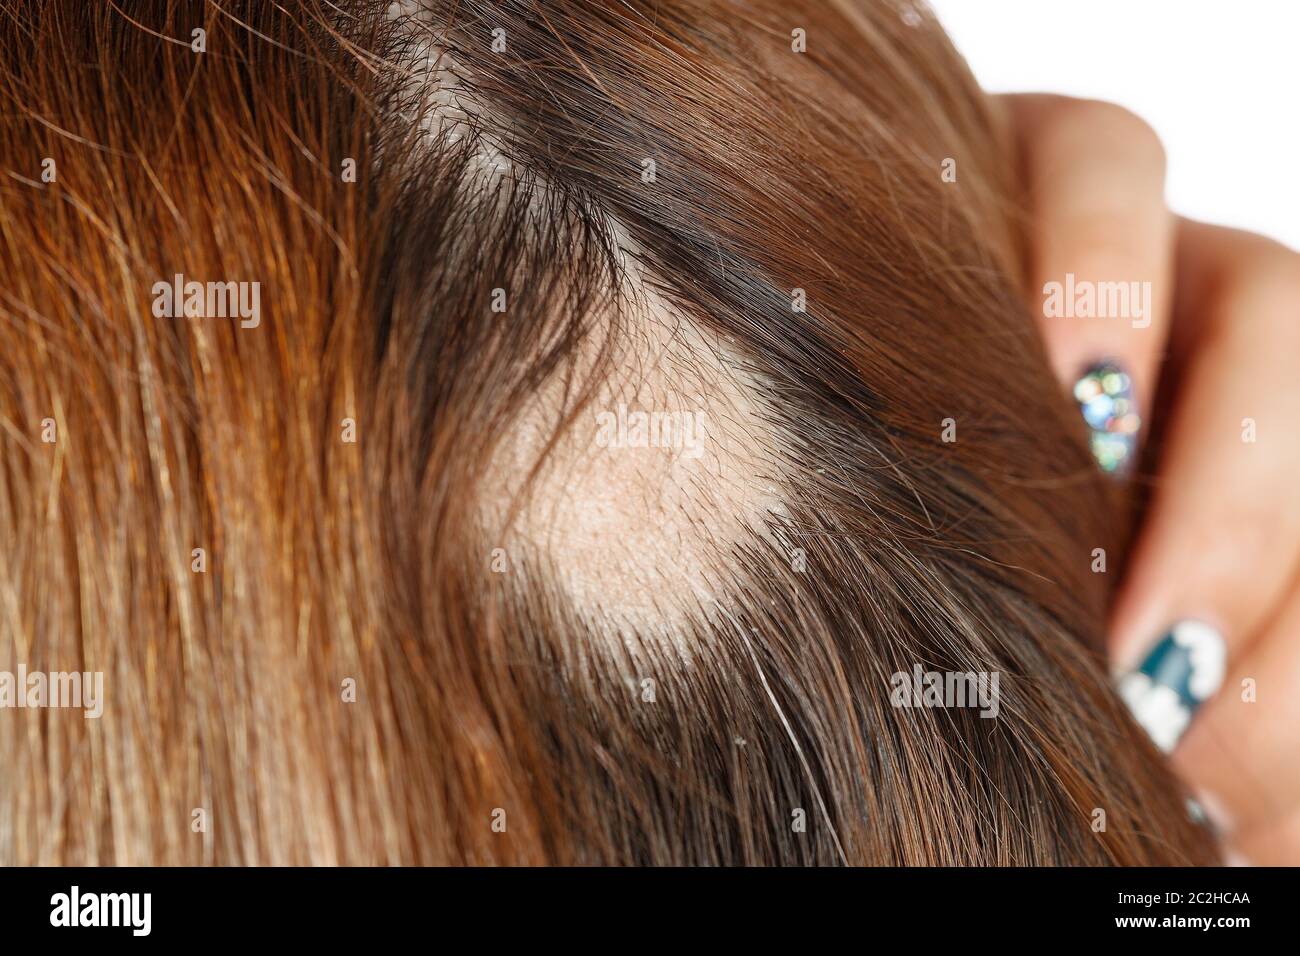 30 year old Caucasian woman with spot alopecia, bald spot on her head Stock Photo